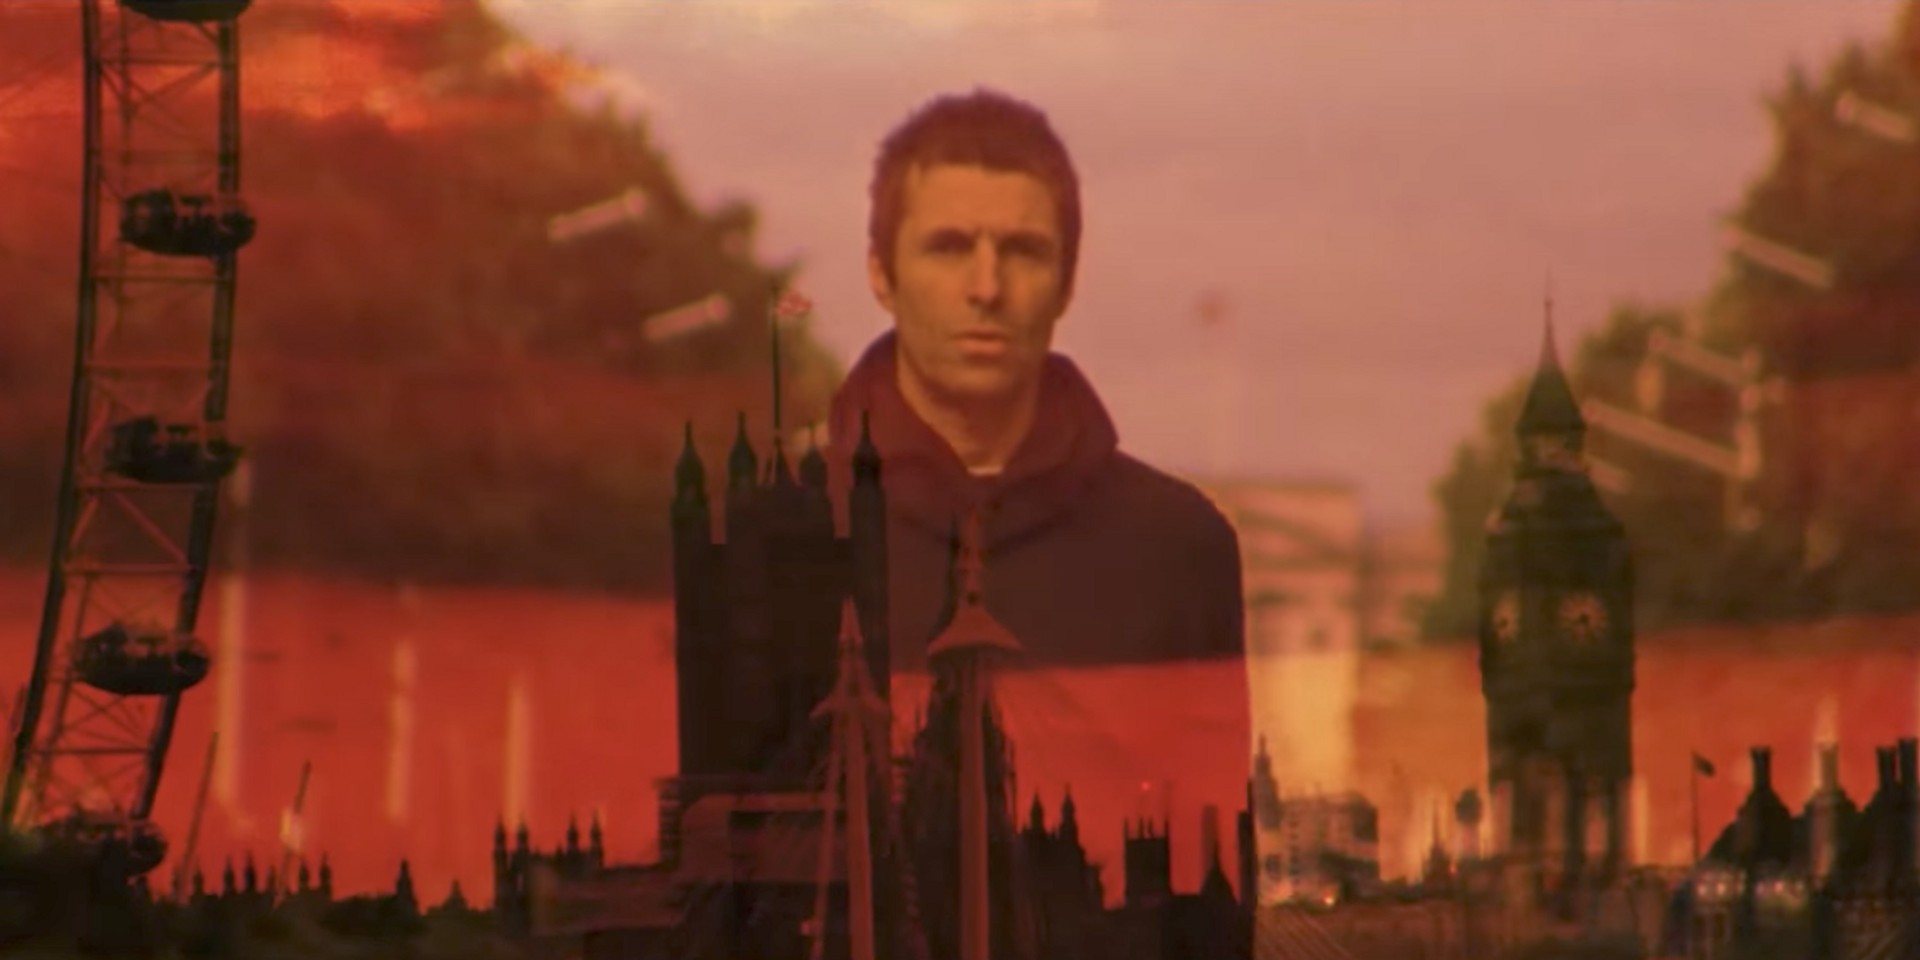 Liam Gallagher shares music video for 'Chinatown', tracklist for As You Were